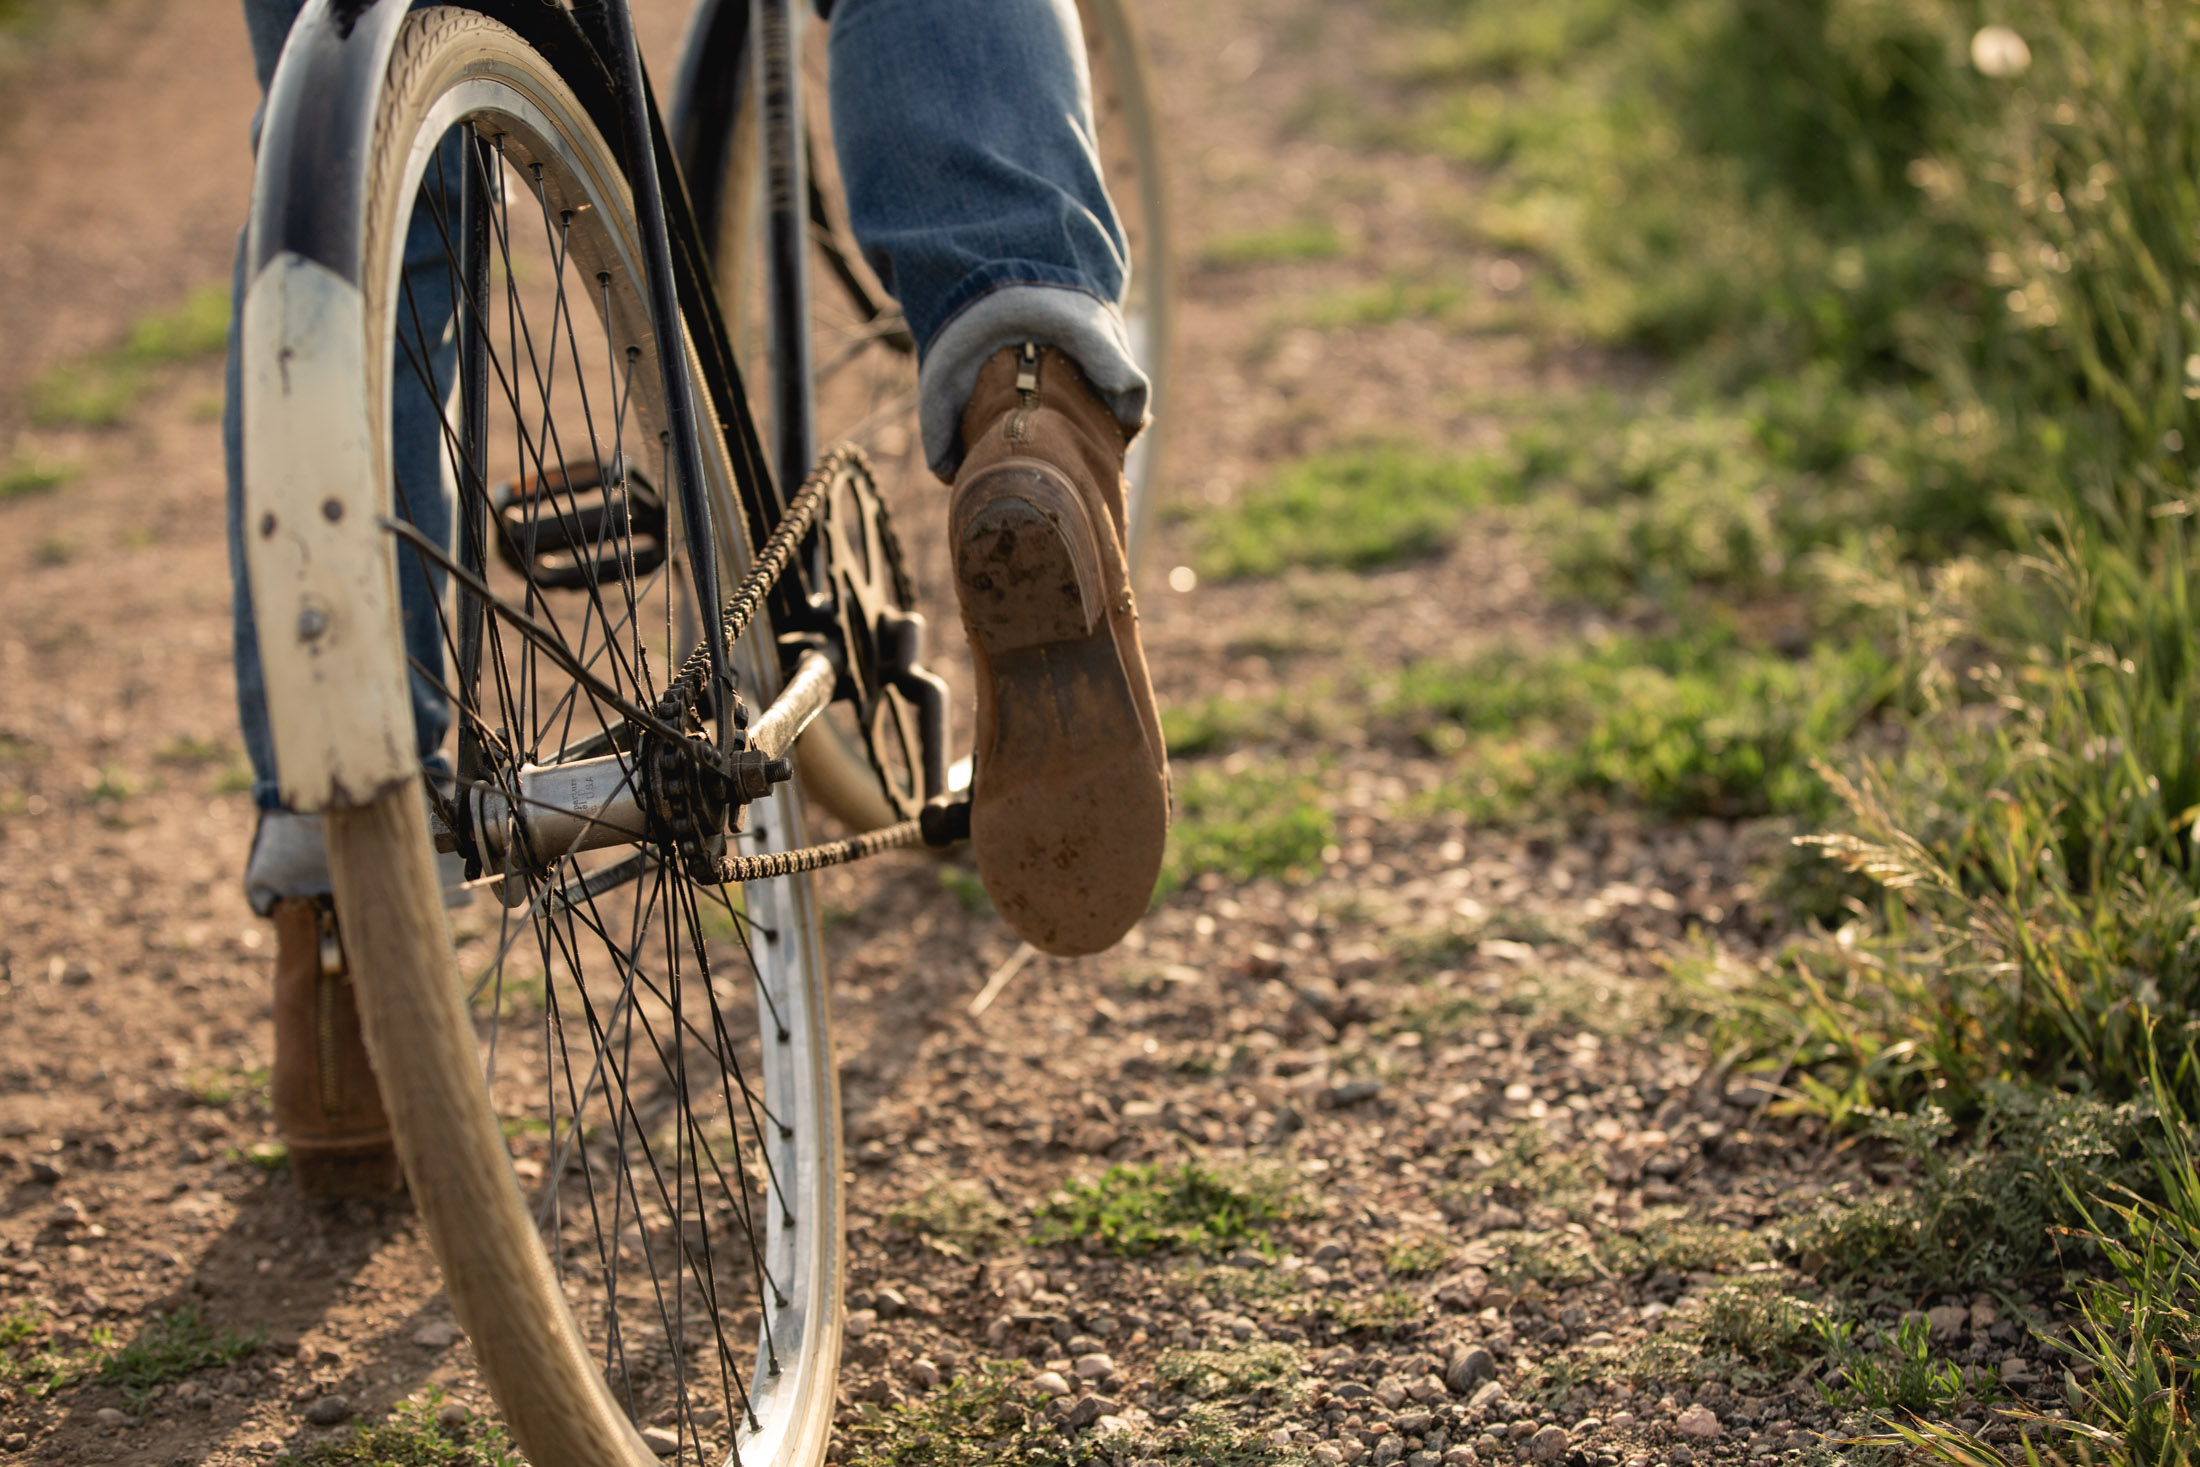 Lifestyle closeup of a woman pedaling a vintage bicycle